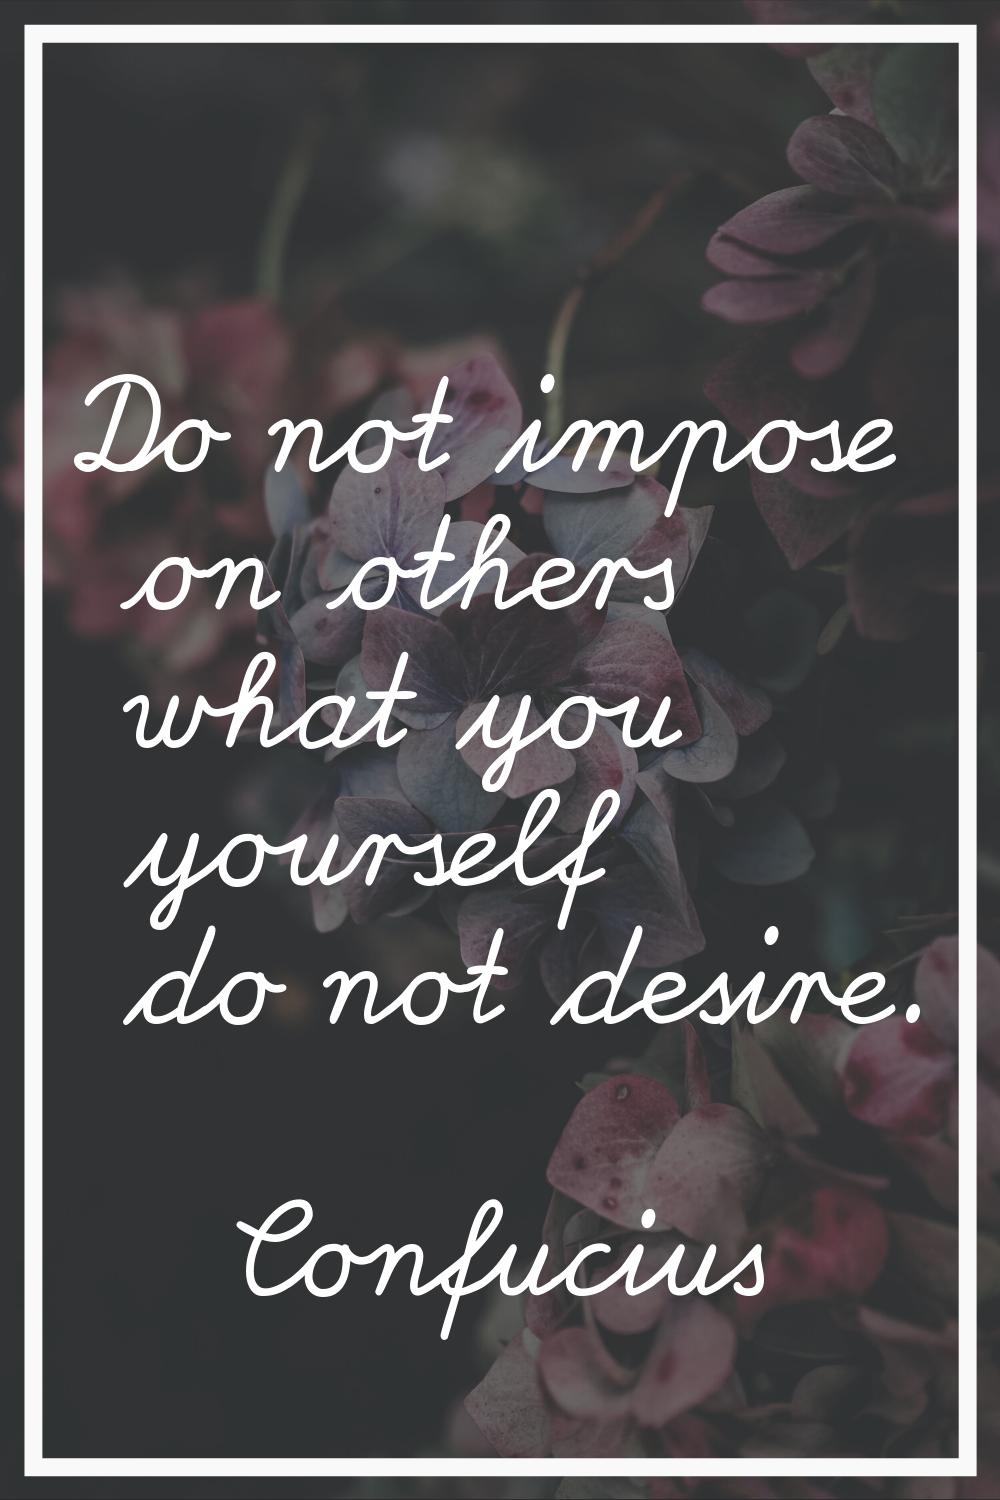 Do not impose on others what you yourself do not desire.